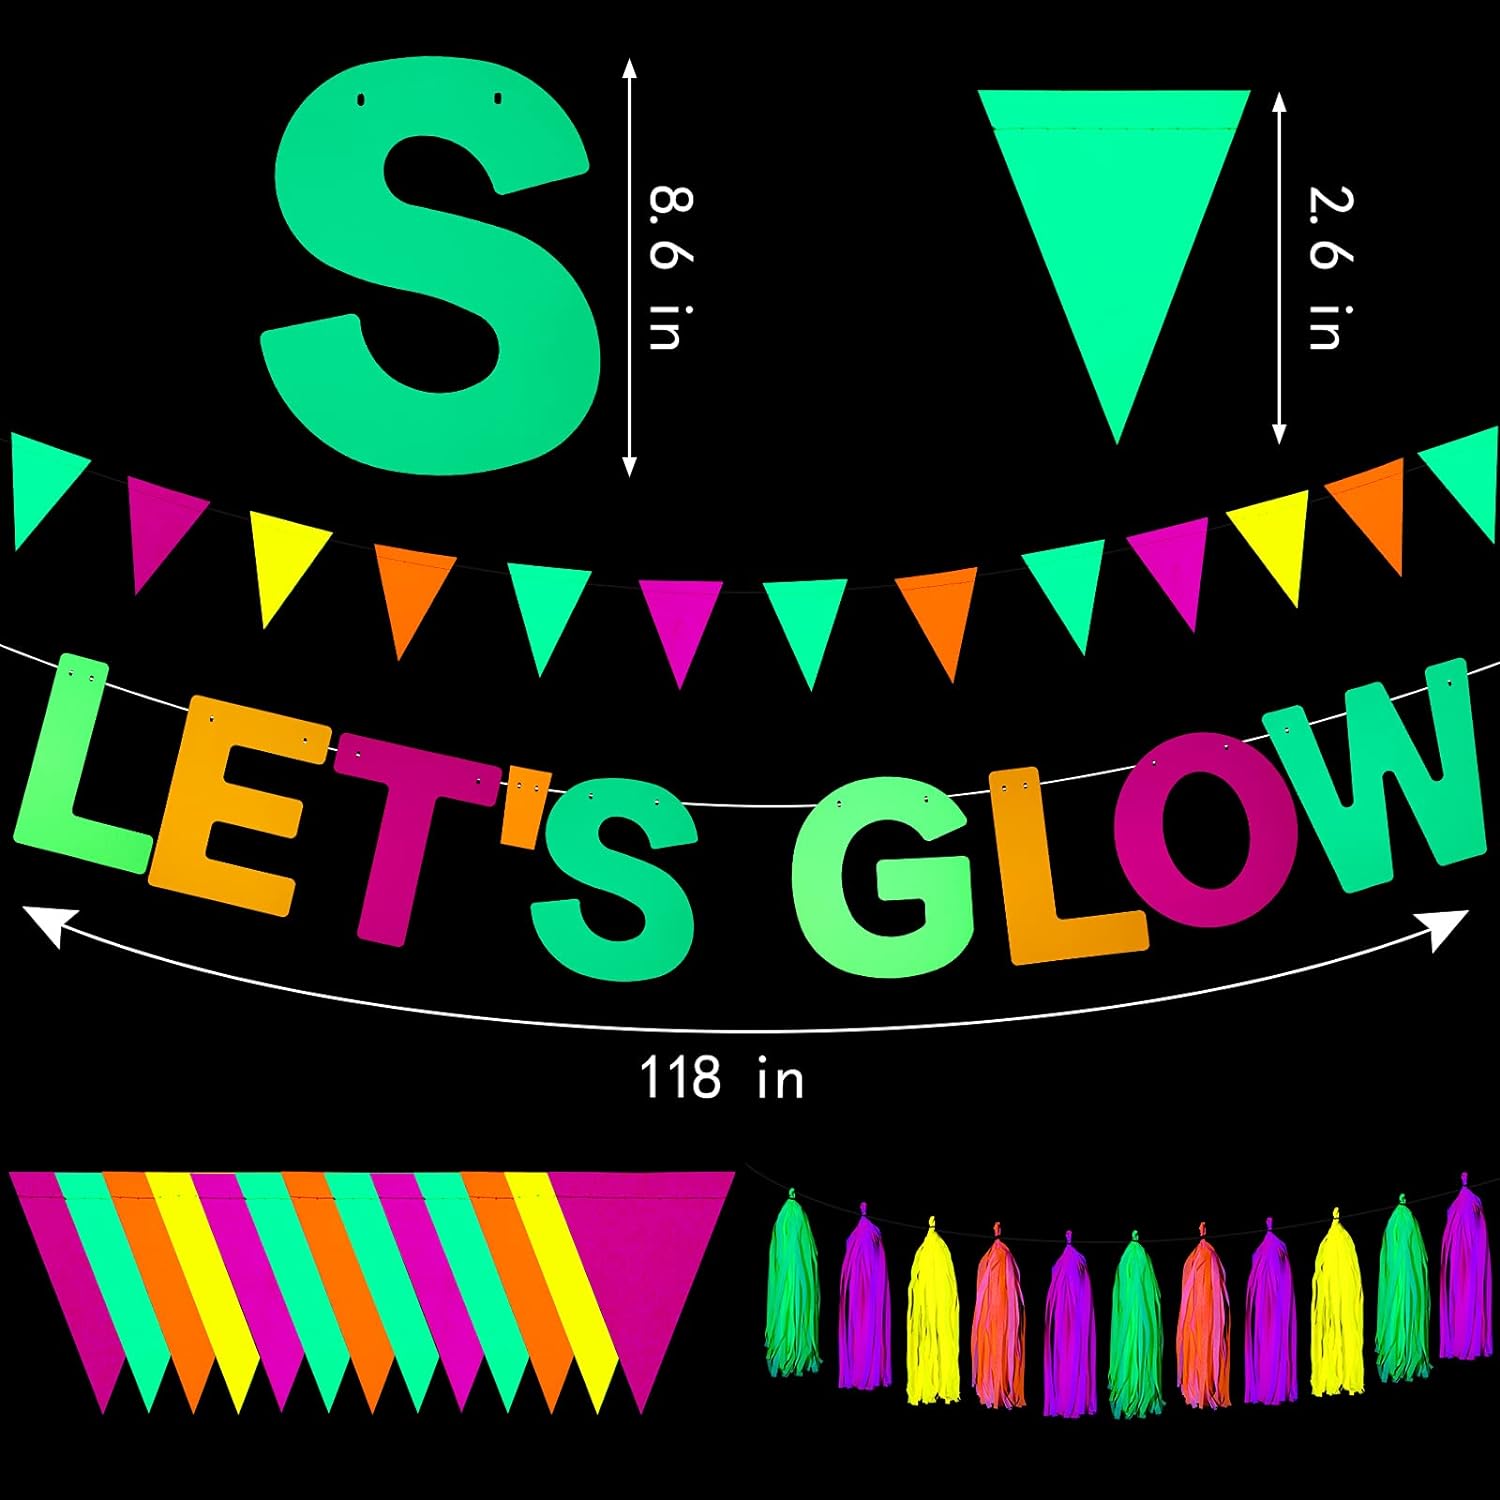 Bulk Glow in the Dark Party Backdrop Decor 'Let's Glow' Banner Neon Paper Tassels and Triangle Flags to Make Birthdays and Christmas Parties Unforgettable Wholesale